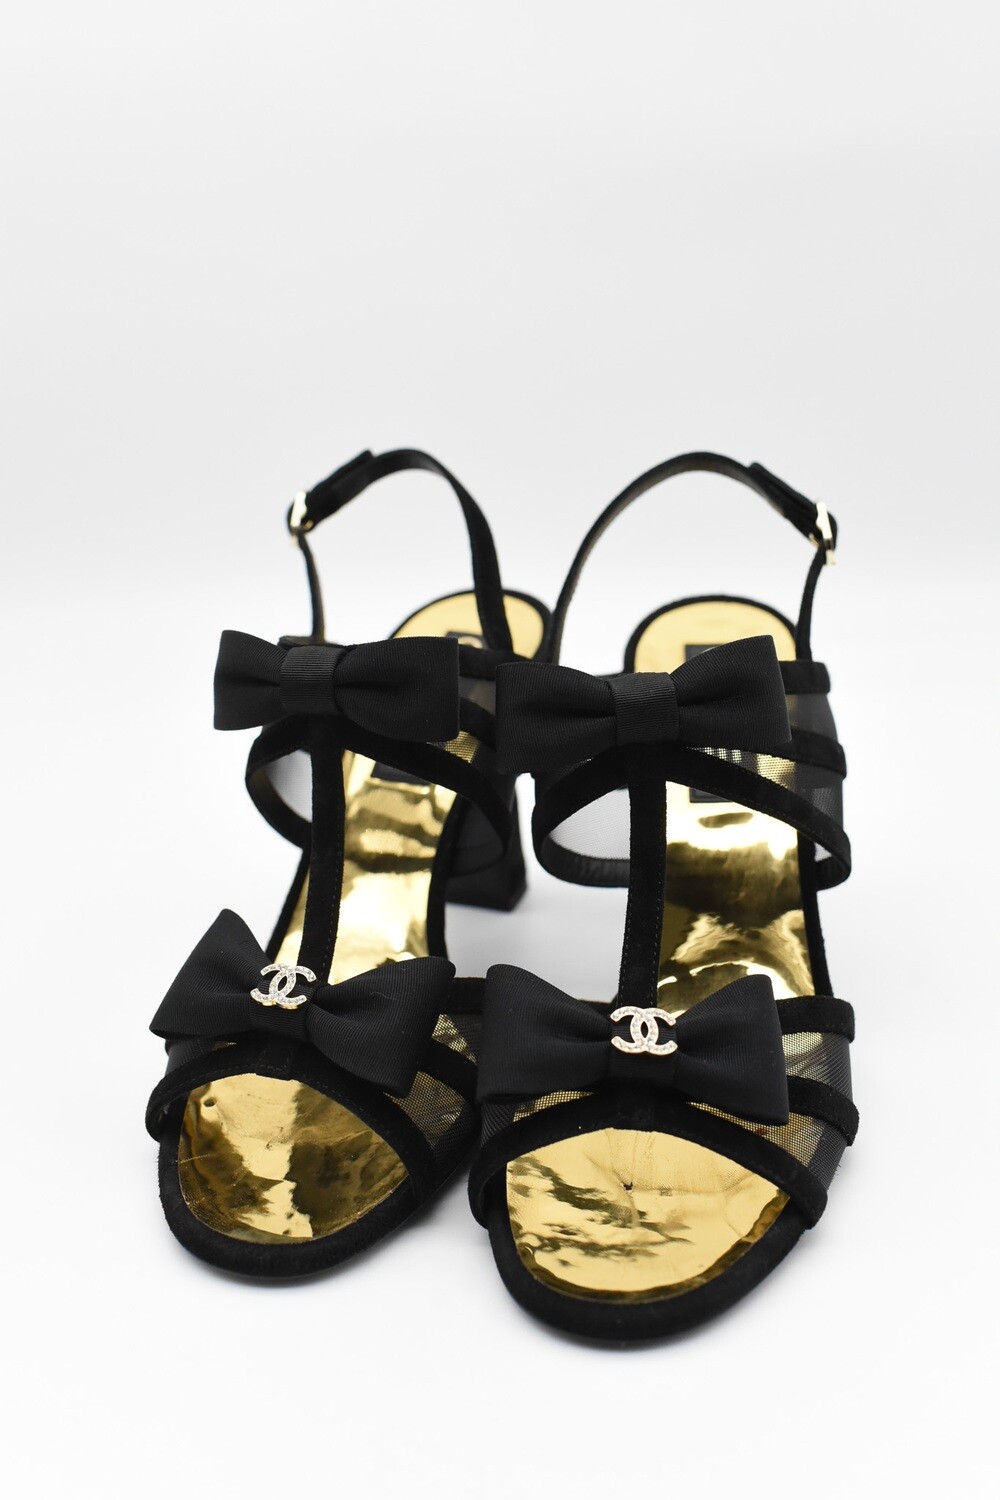 Boutique CHANEL Gold leather heel sandals embellished with gold chains Size  35.5